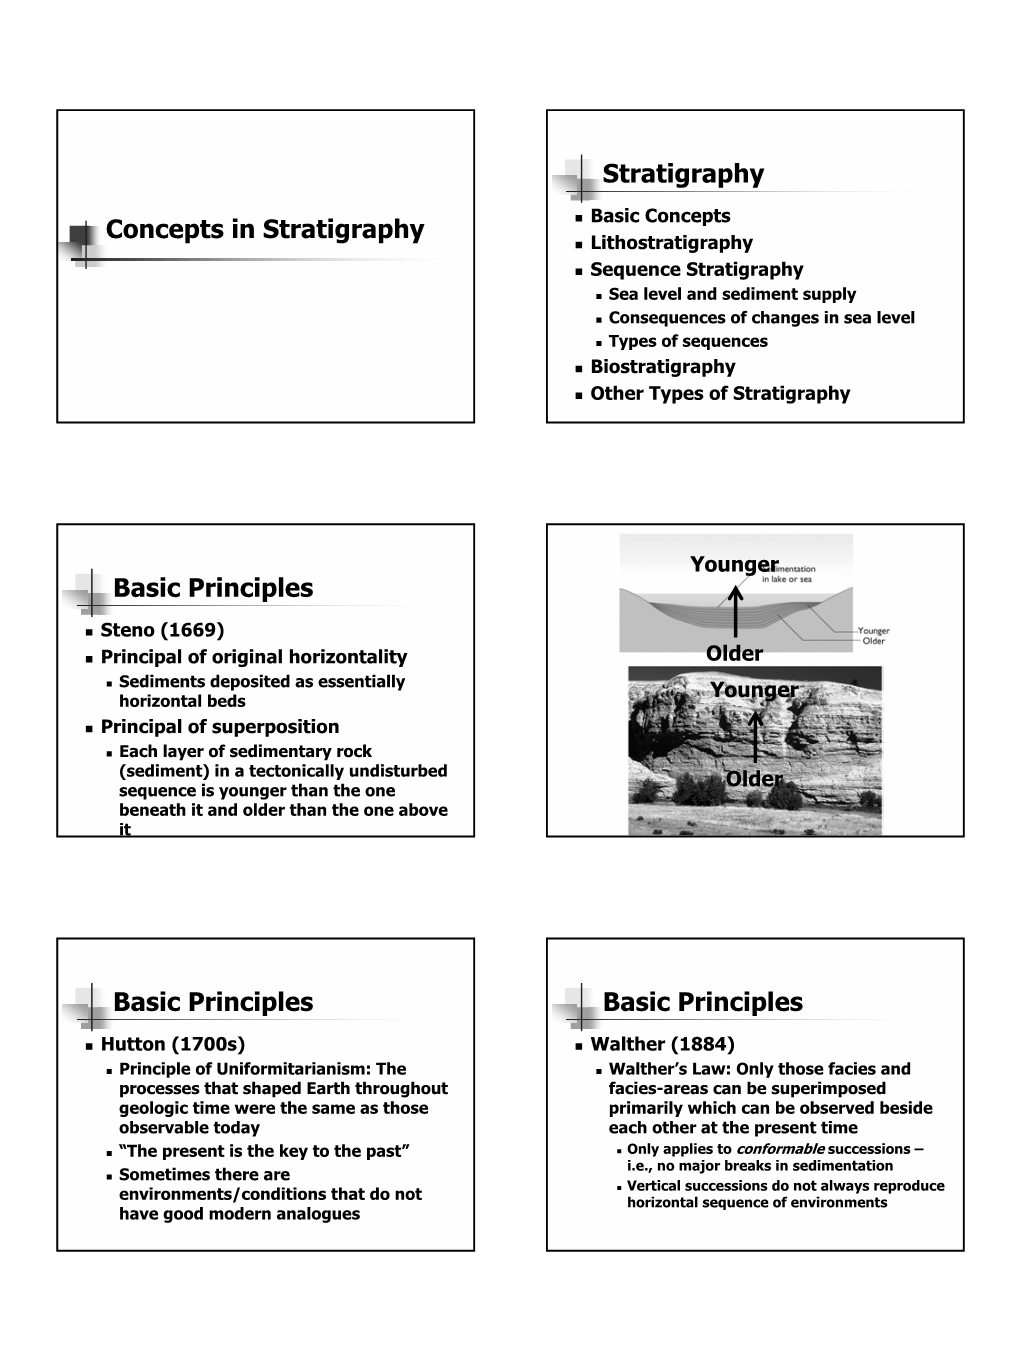 Concepts in Stratigraphy Stratigraphy Basic Principles Basic Principles Basic Principles